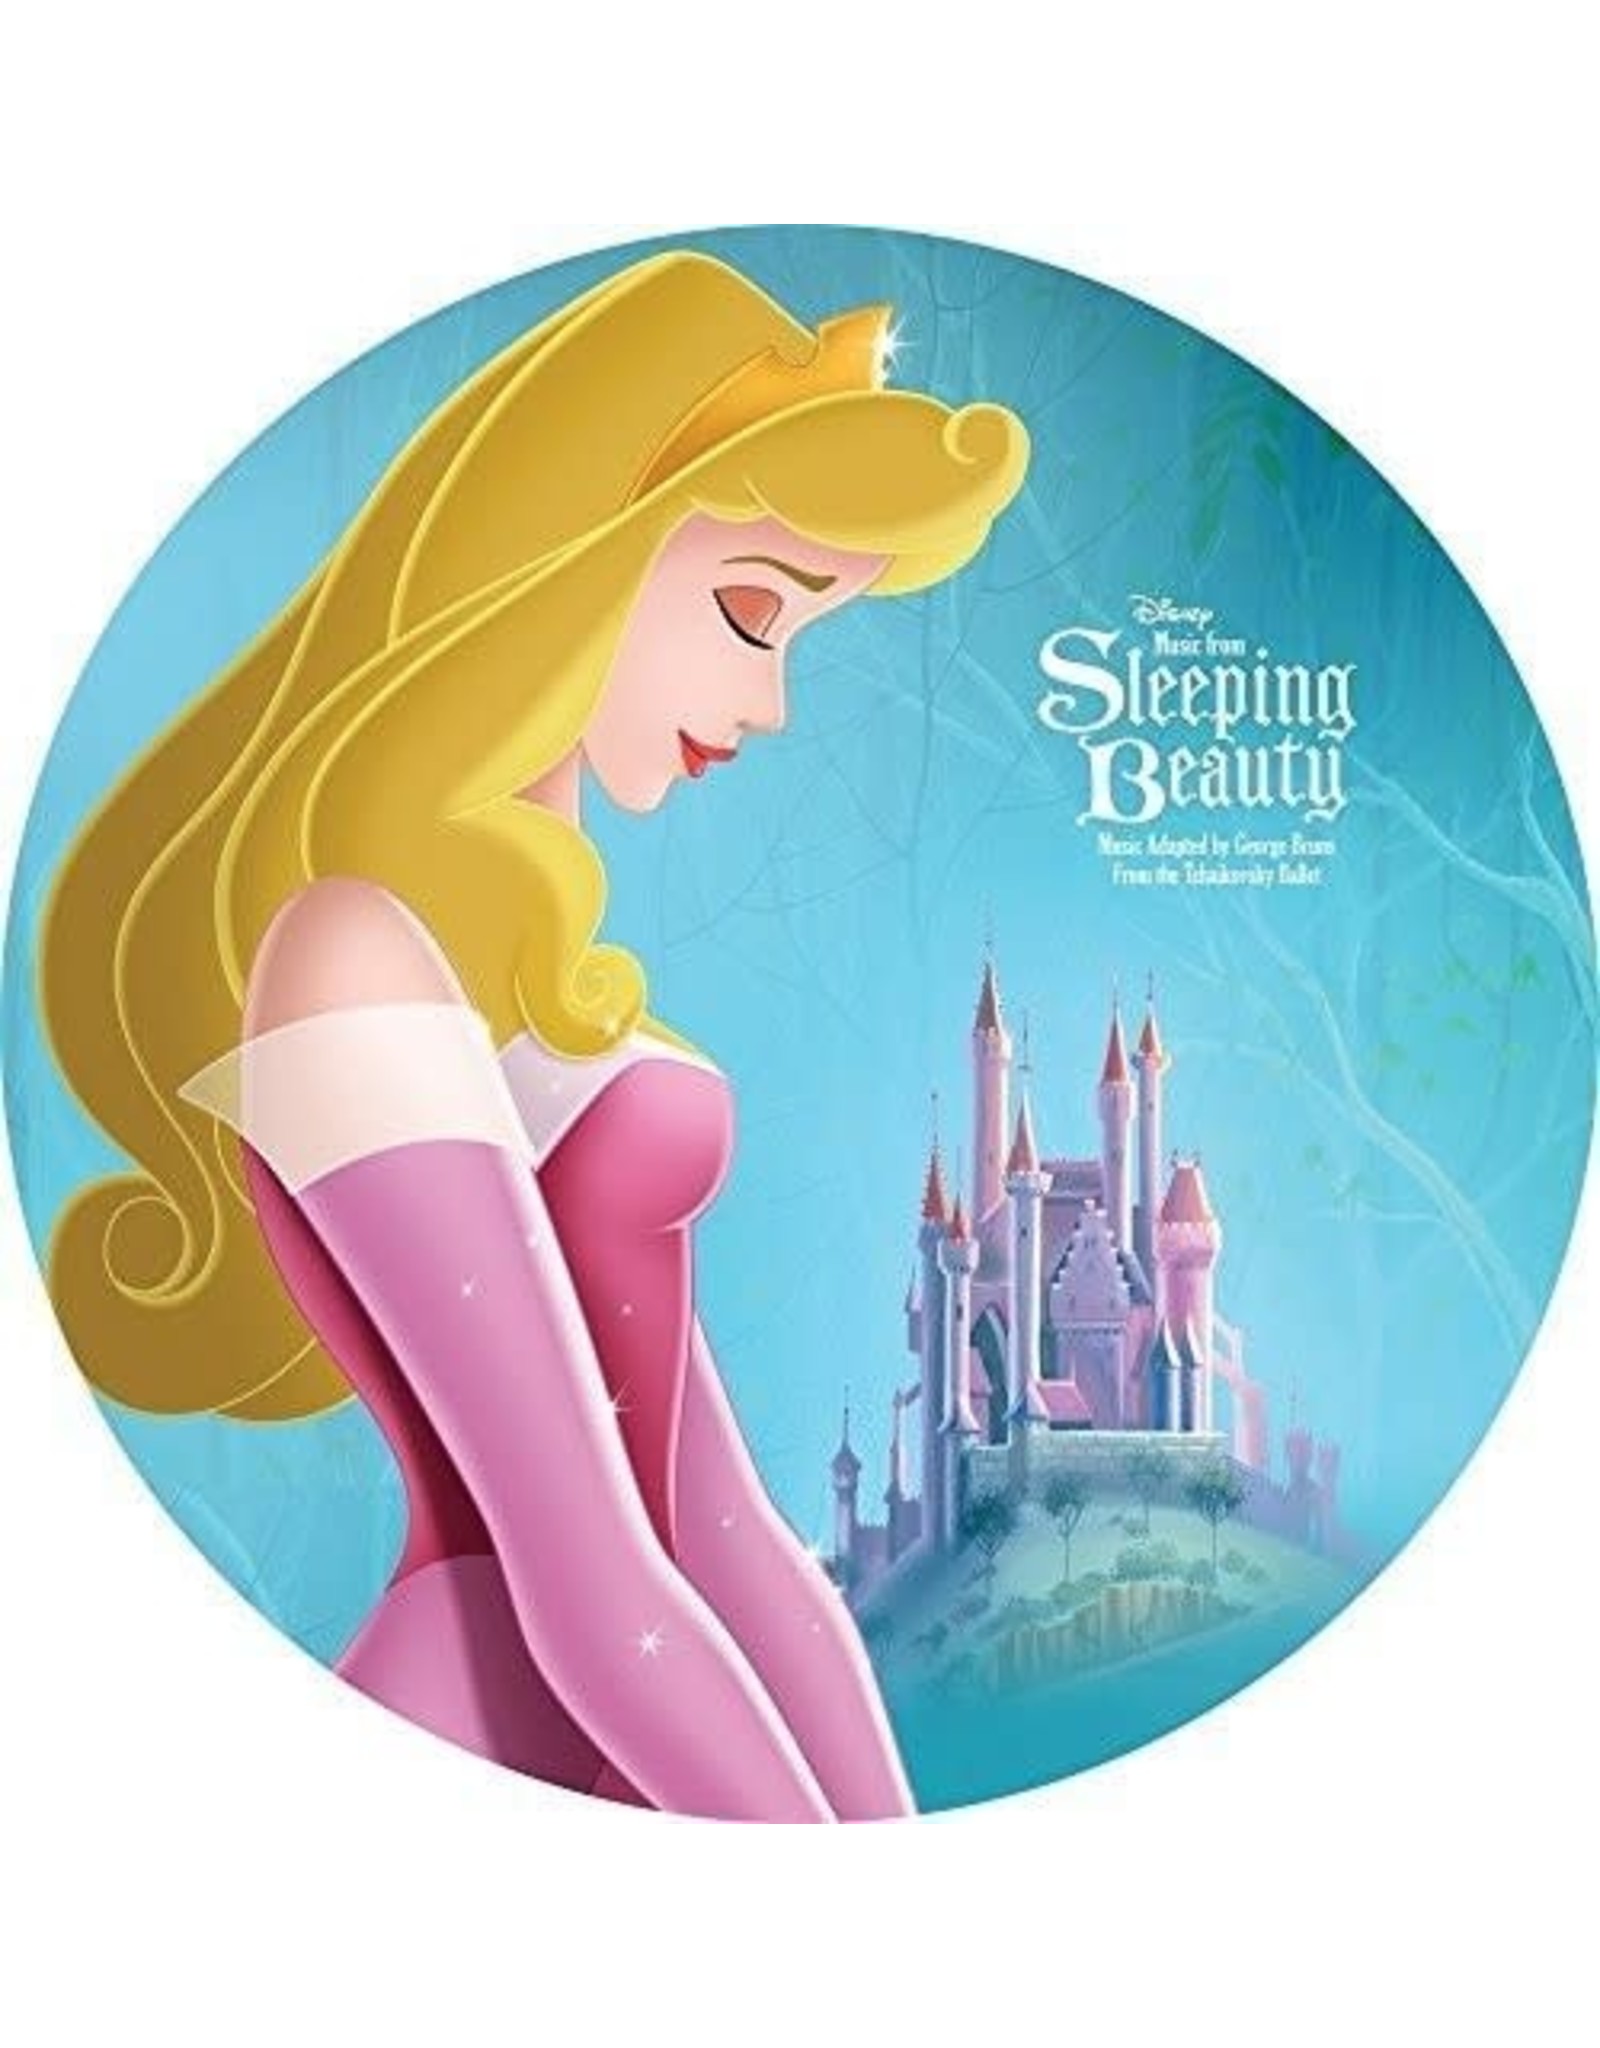 New Vinyl Music From Sleeping Beauty OST (Picture Disc, Limited Edition) LP